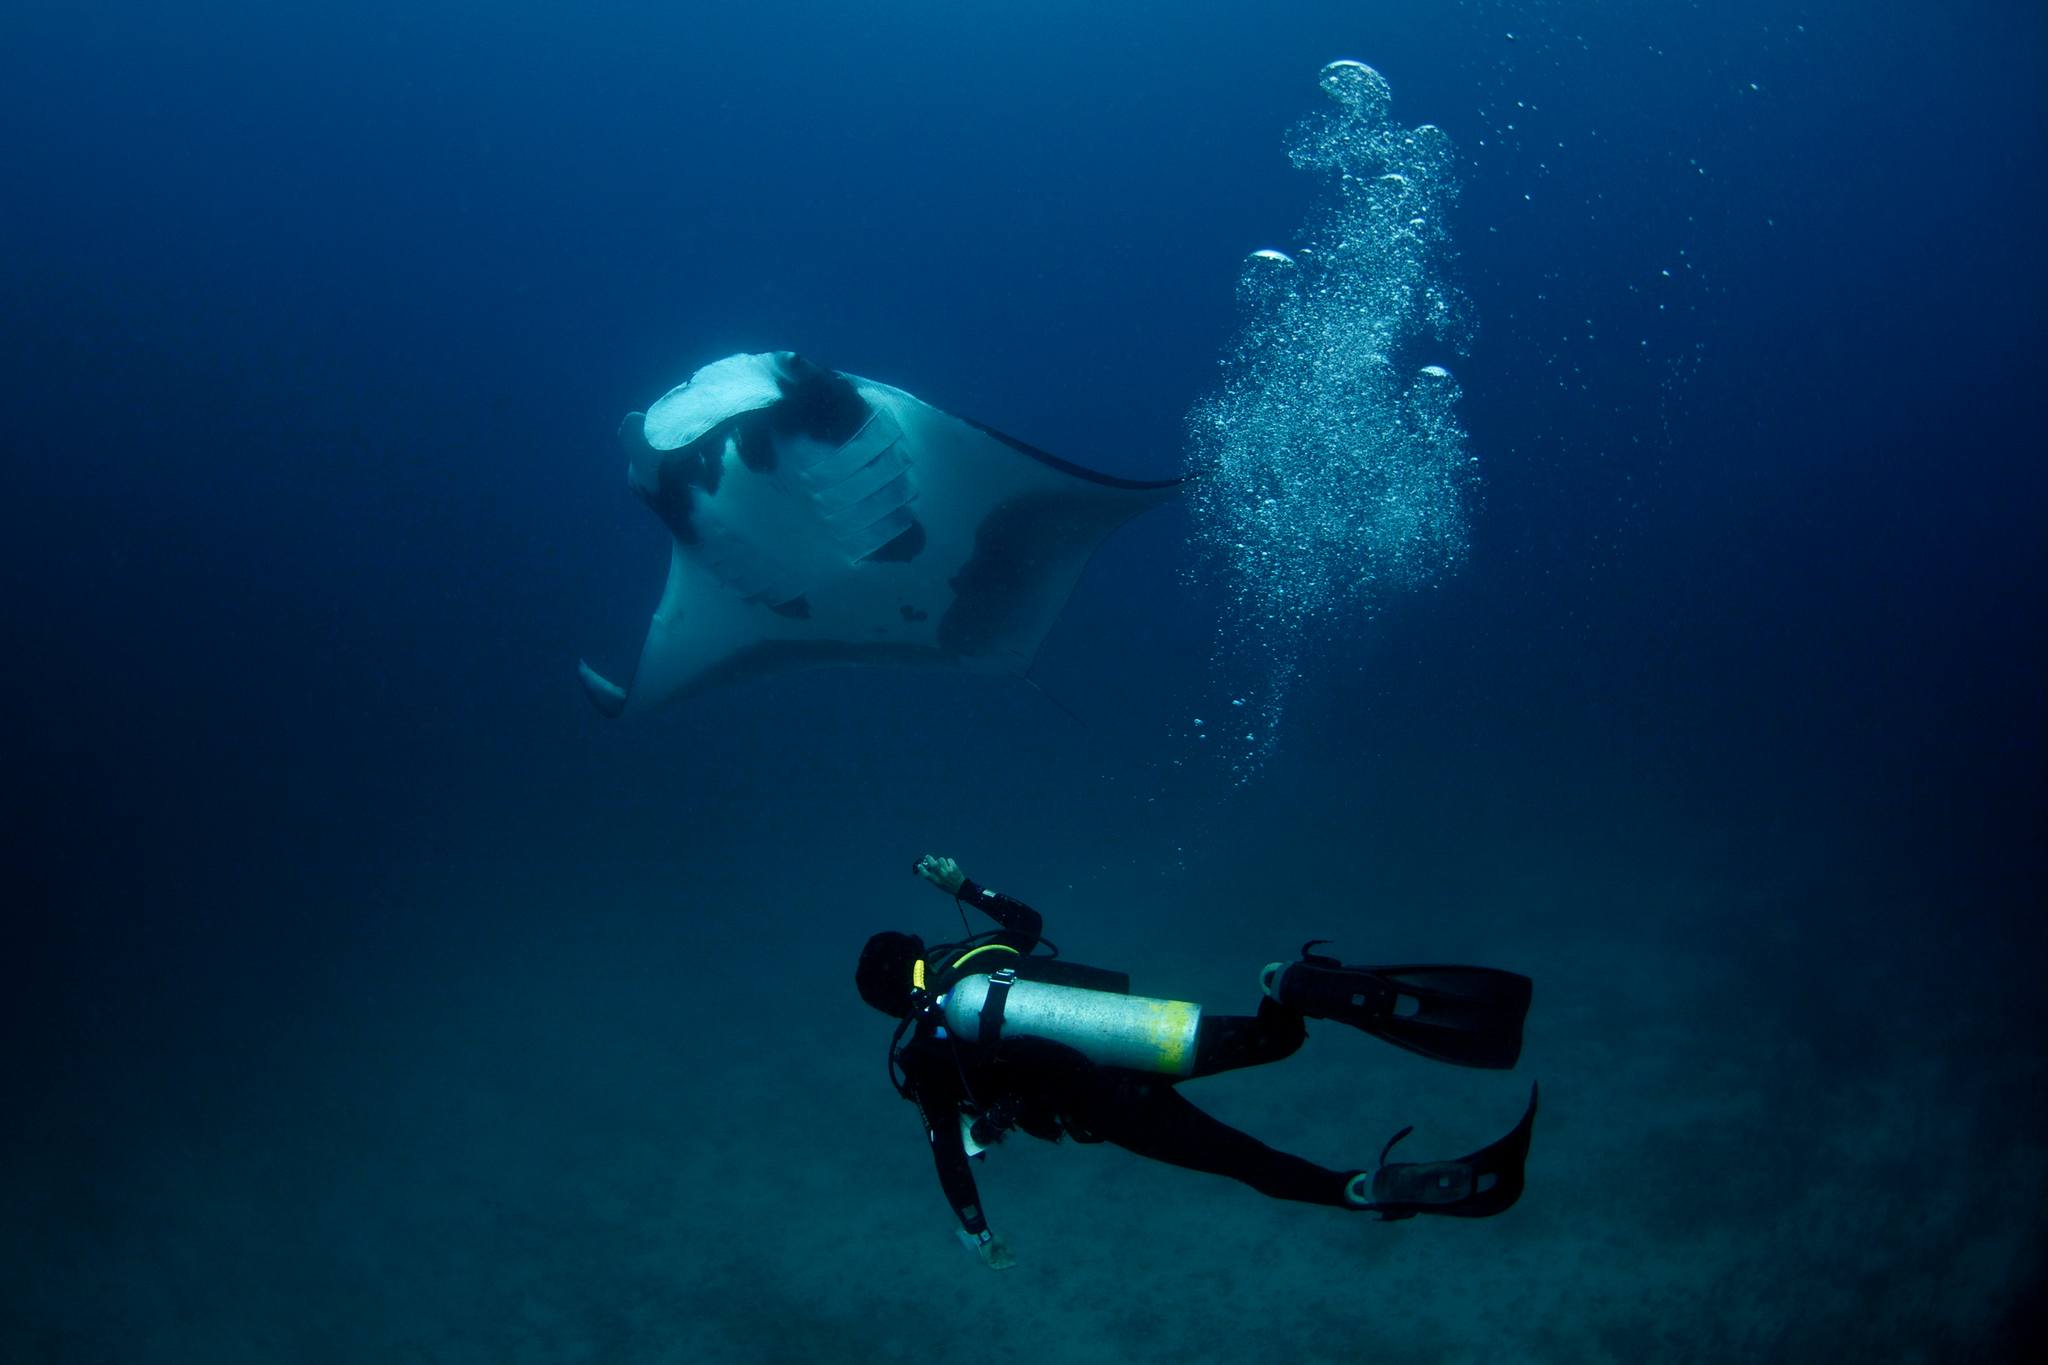 MCAF Fellow Andres Lopez diving with a giant manta ray in Costa Rica.